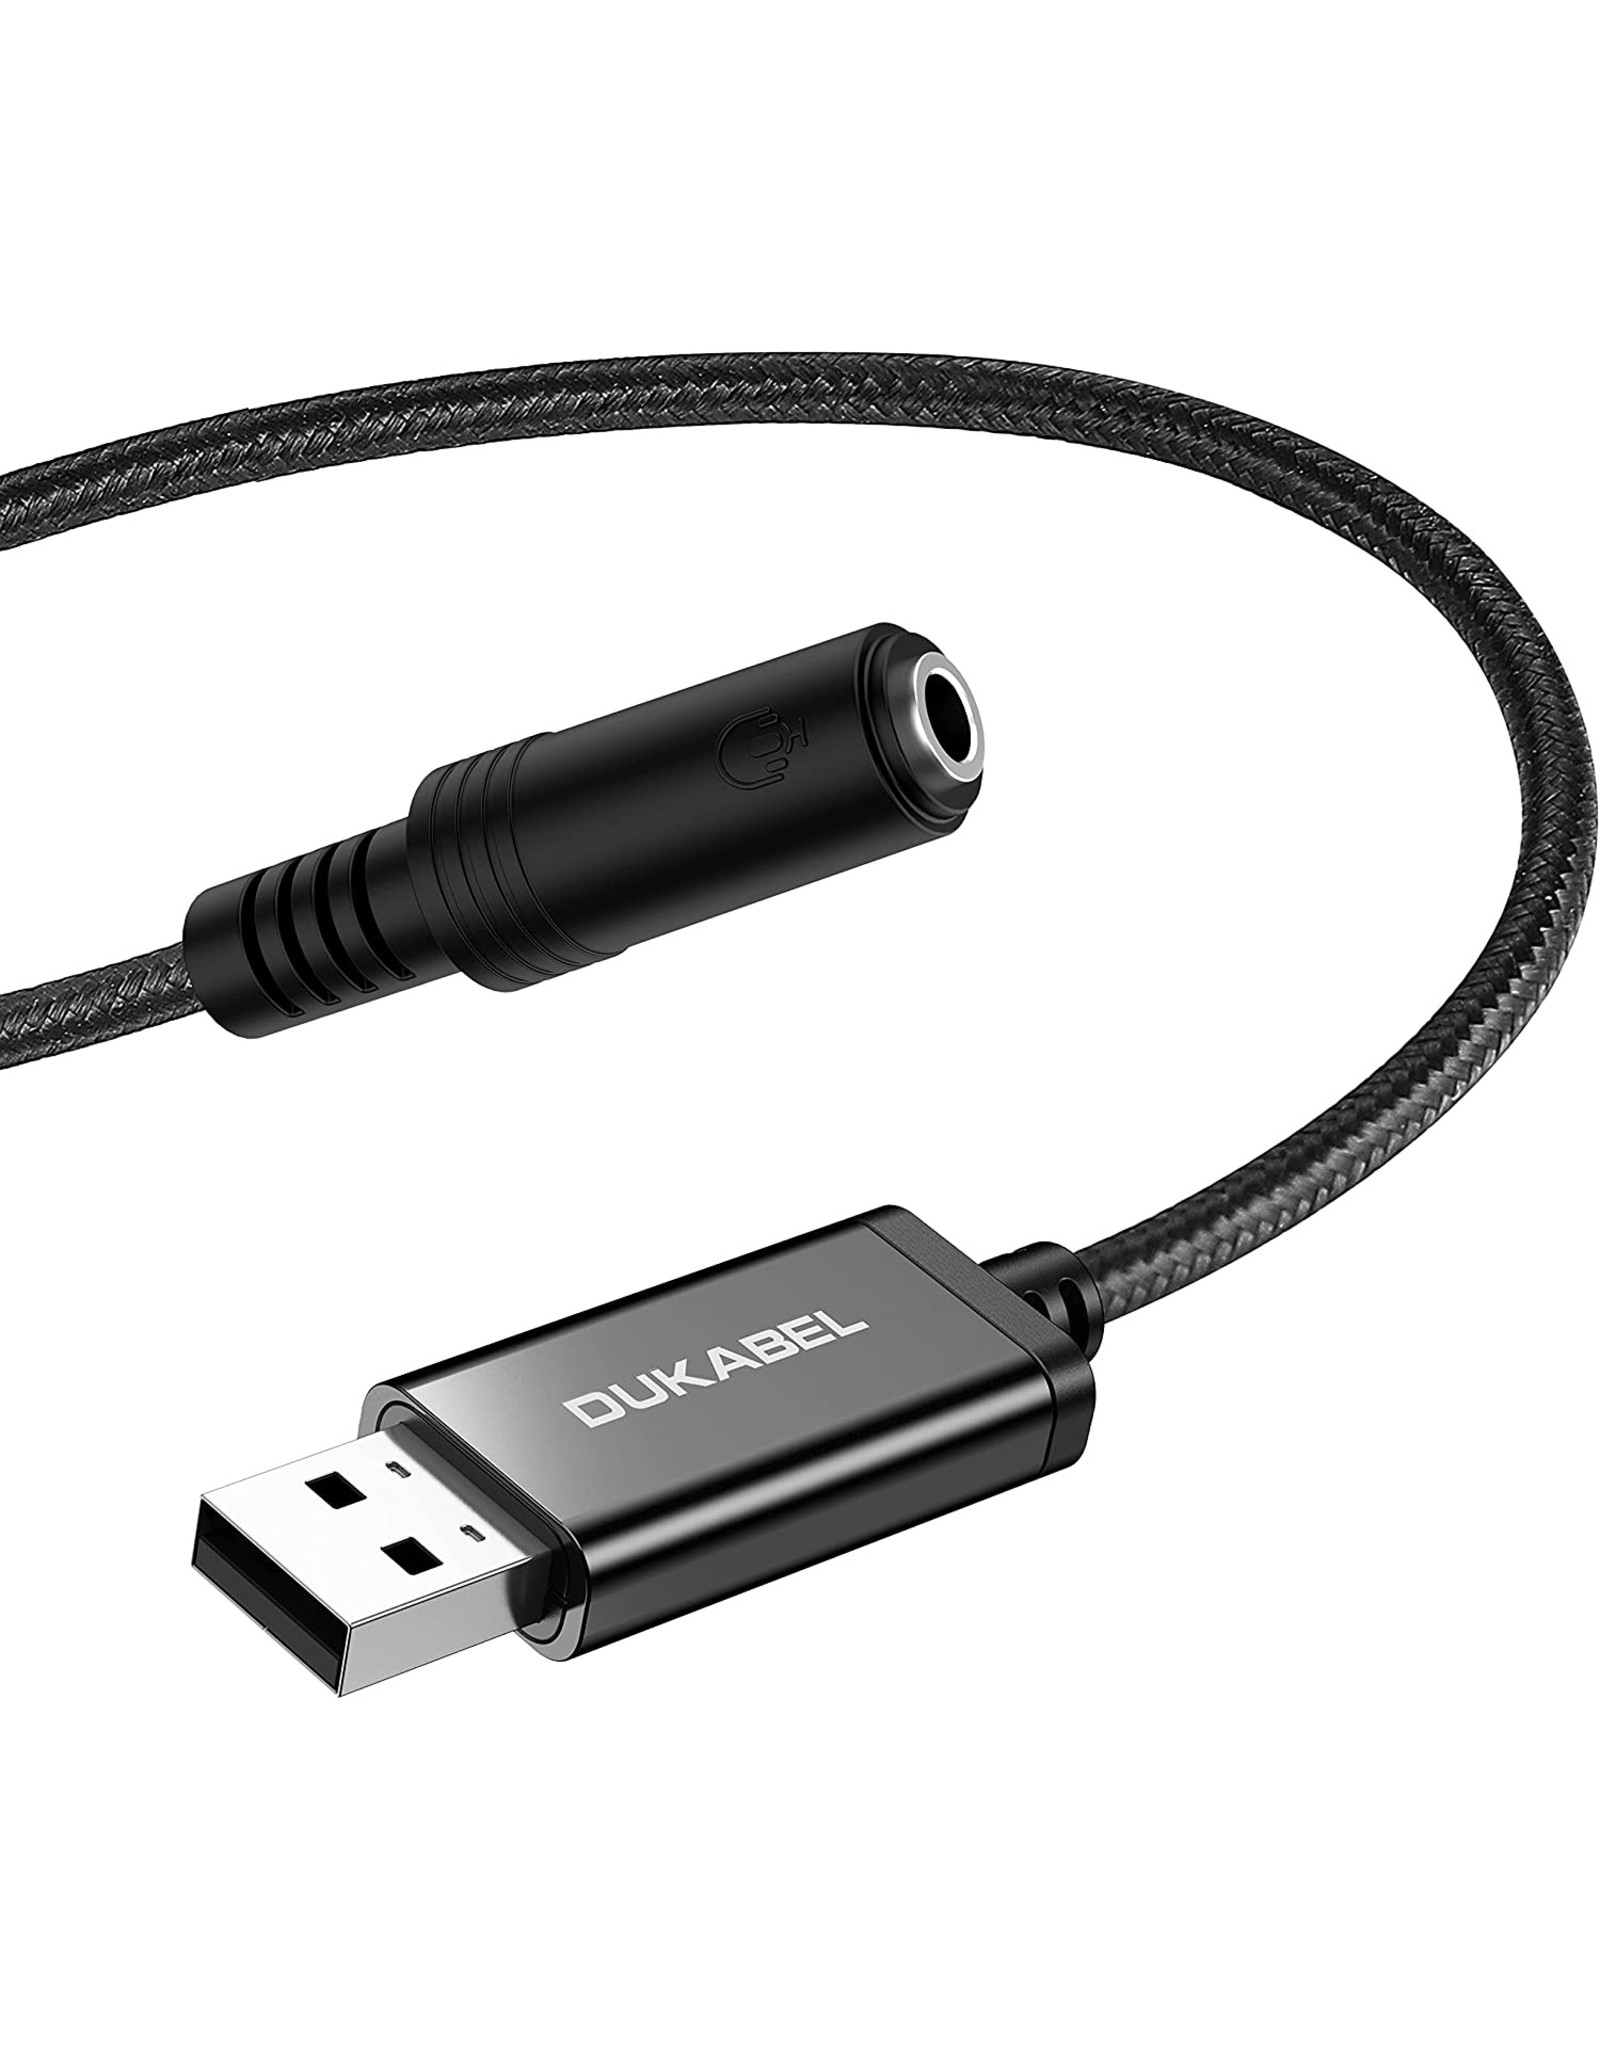 firewire 800 to usb cable